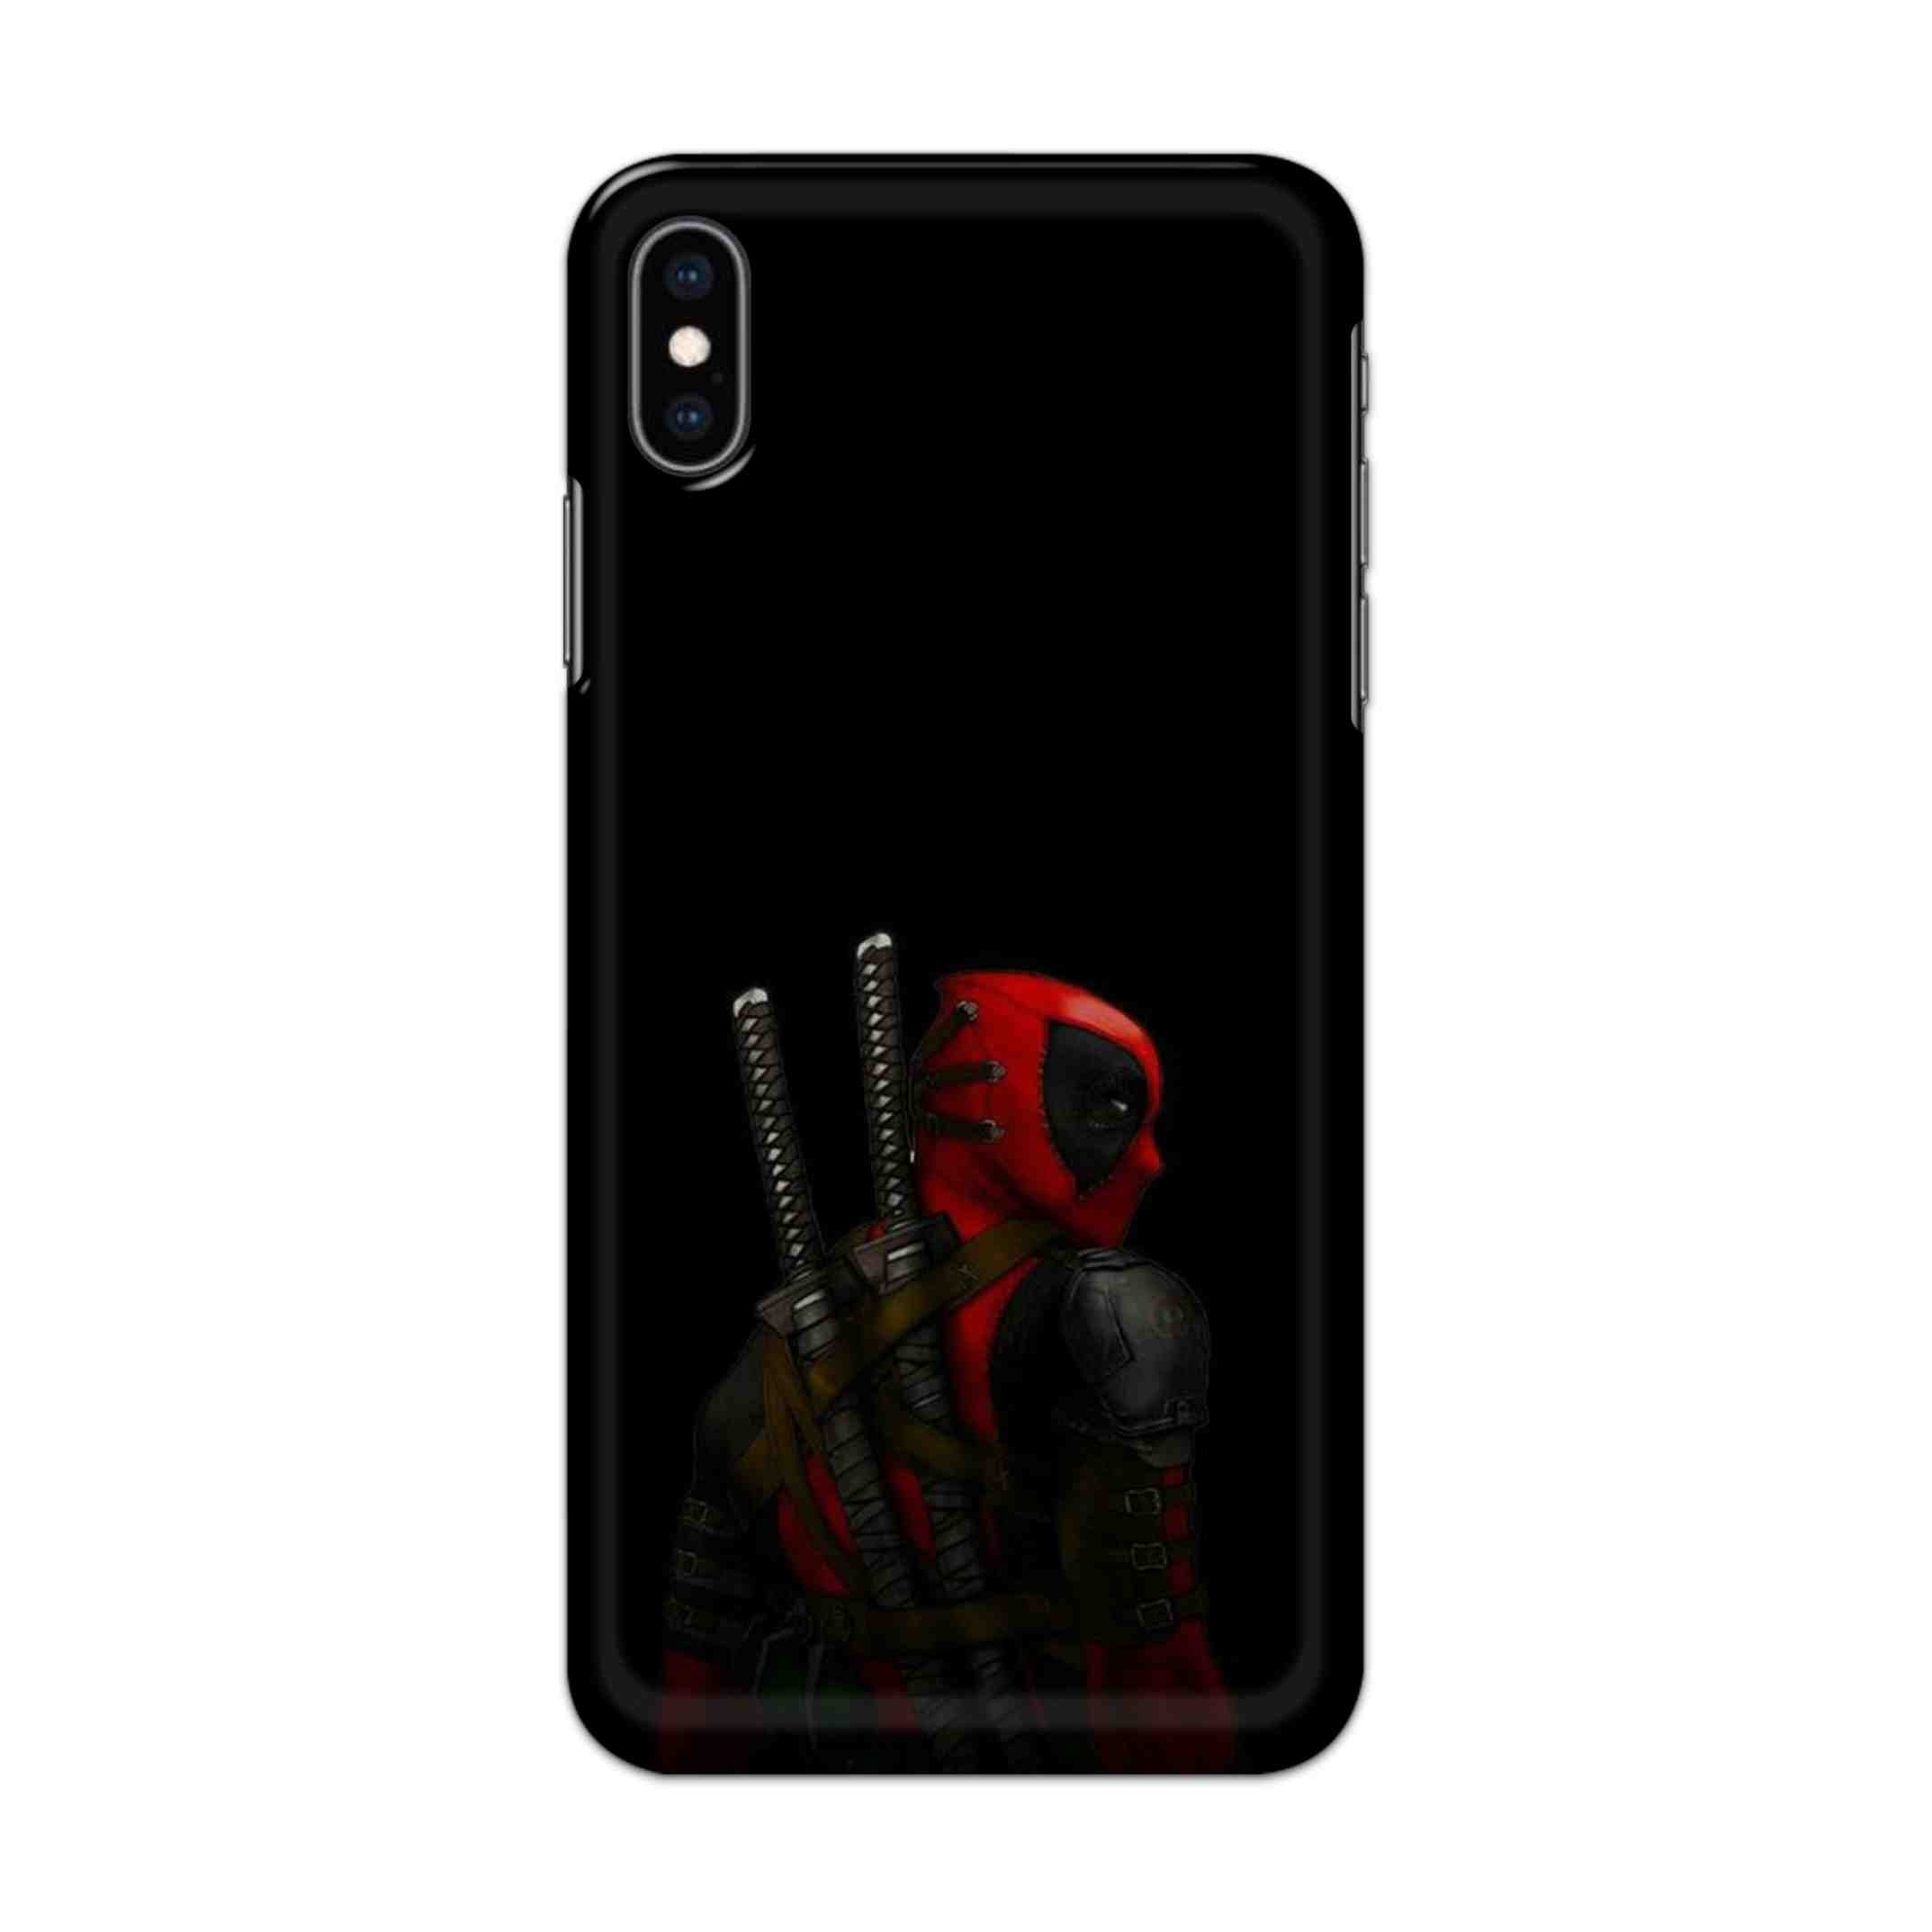 Buy Deadpool Hard Back Mobile Phone Case/Cover For iPhone XS MAX Online